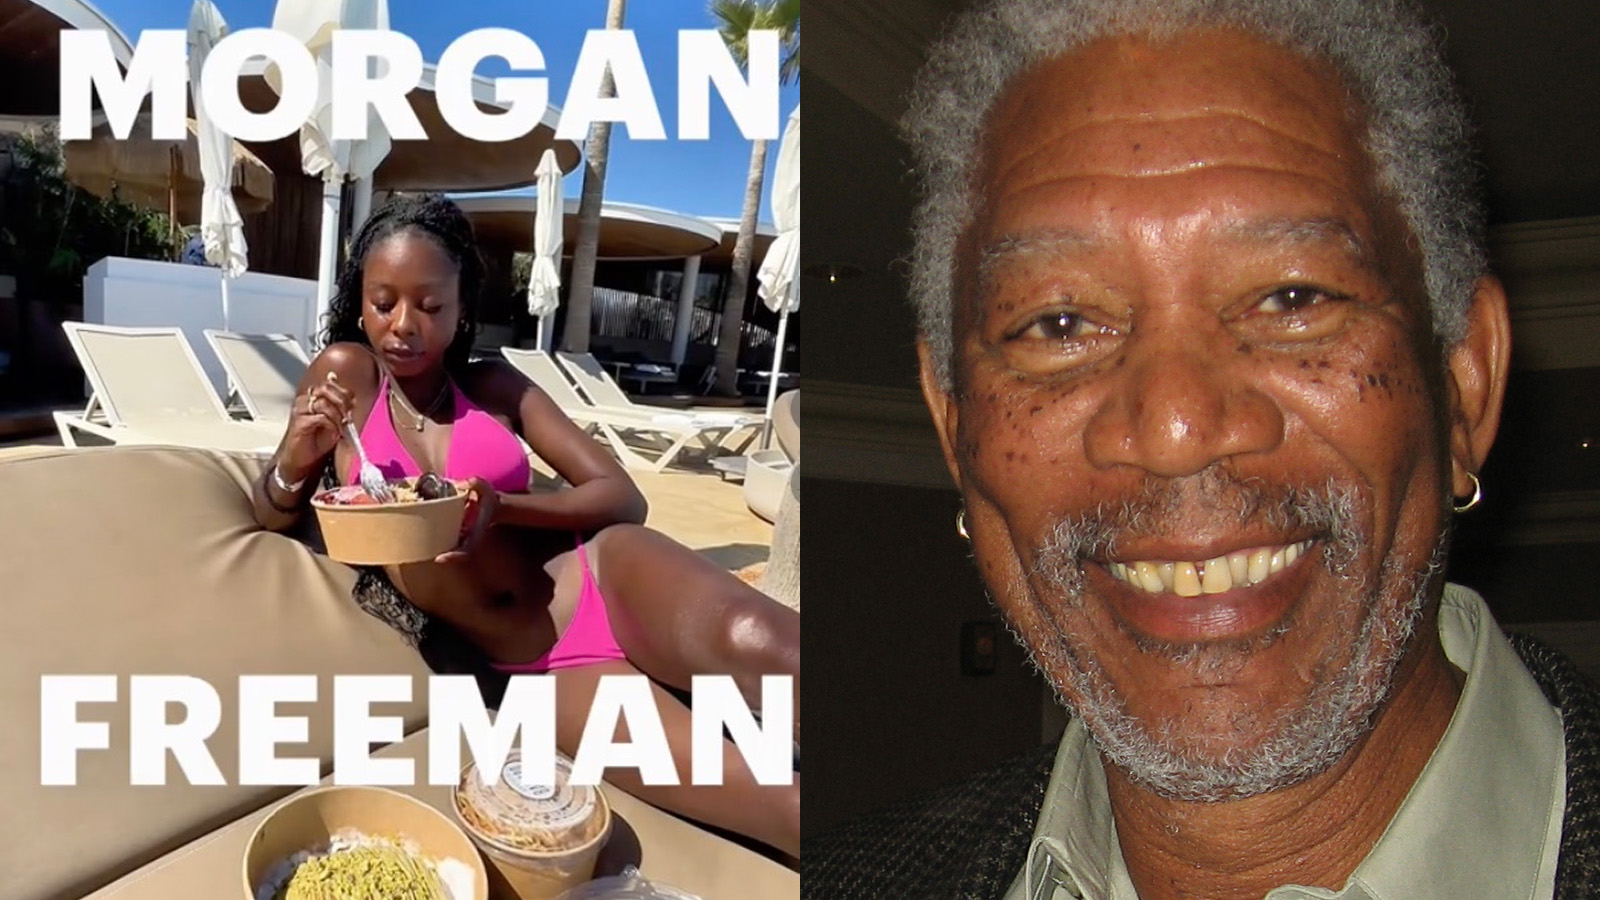 Morgan Freeman responds after video using his voice goes viral